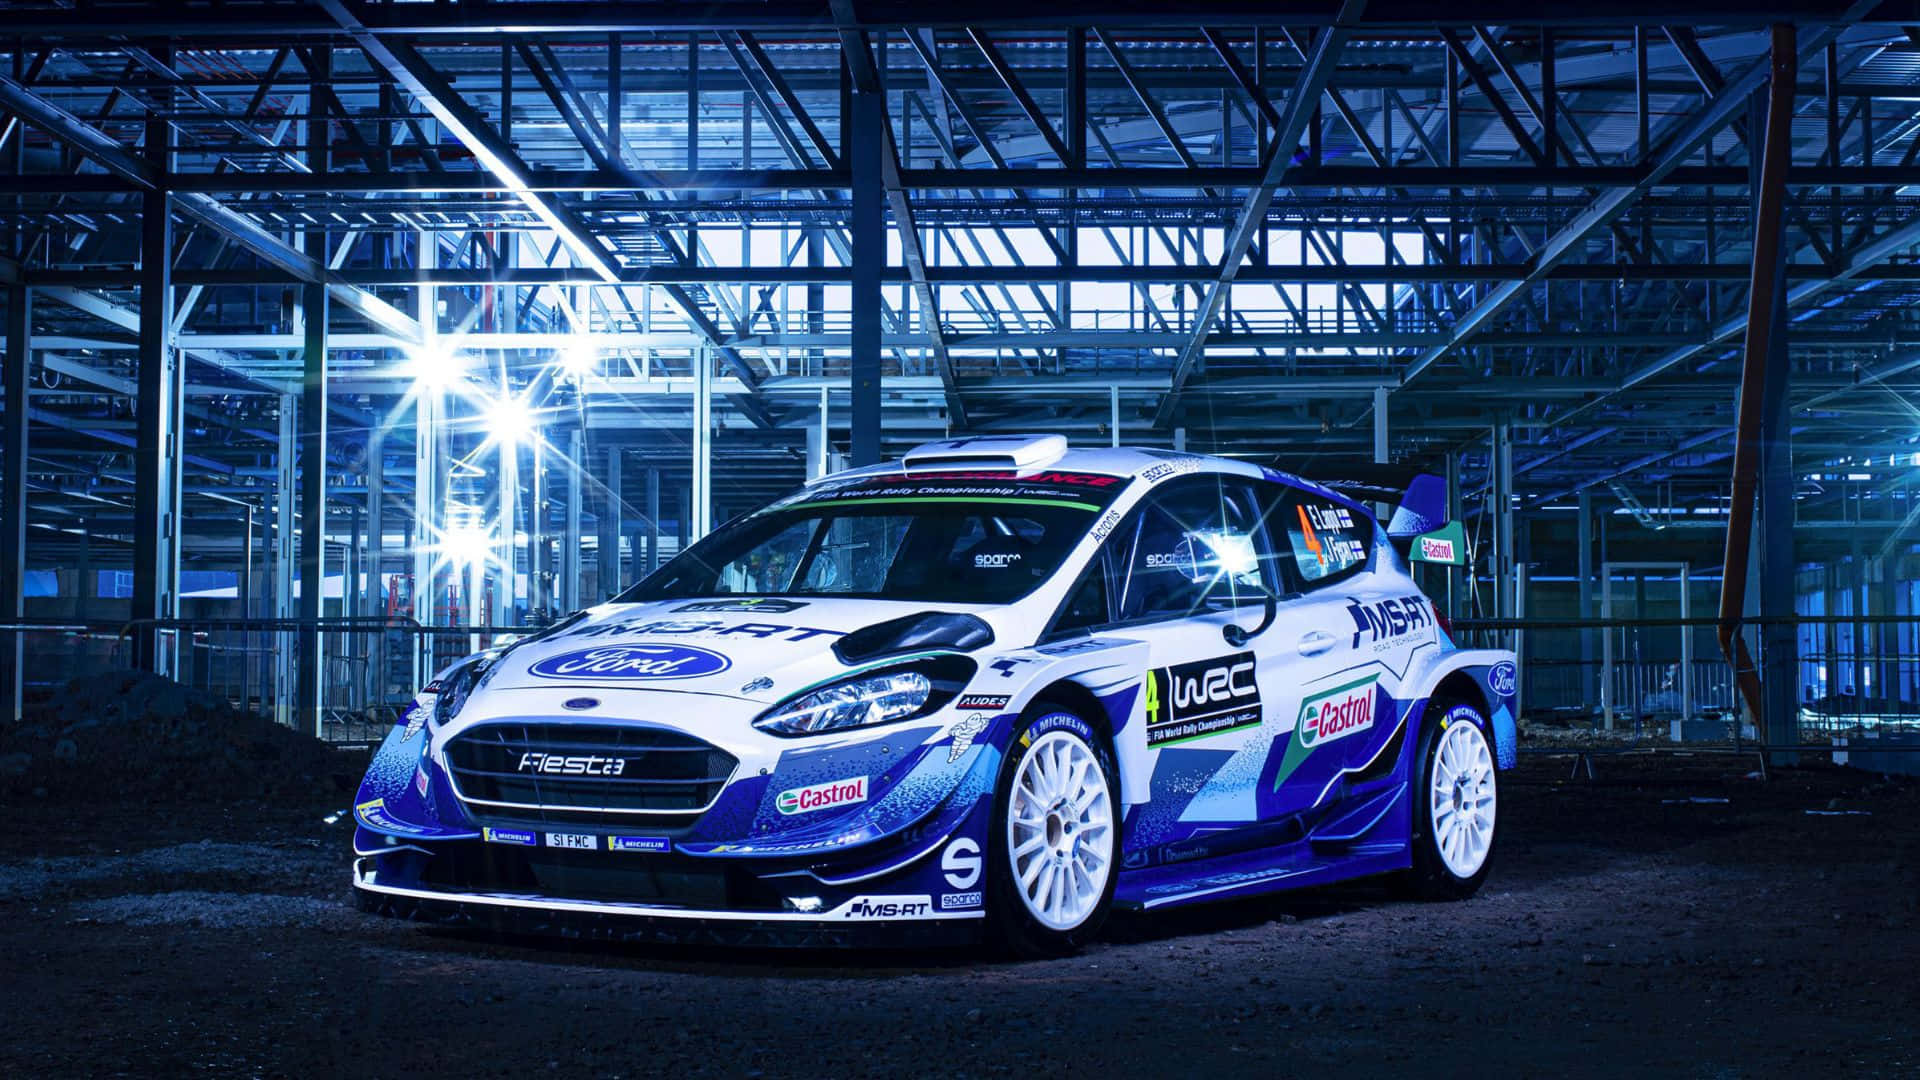 Stunning Ford Fiesta in Action Wallpaper